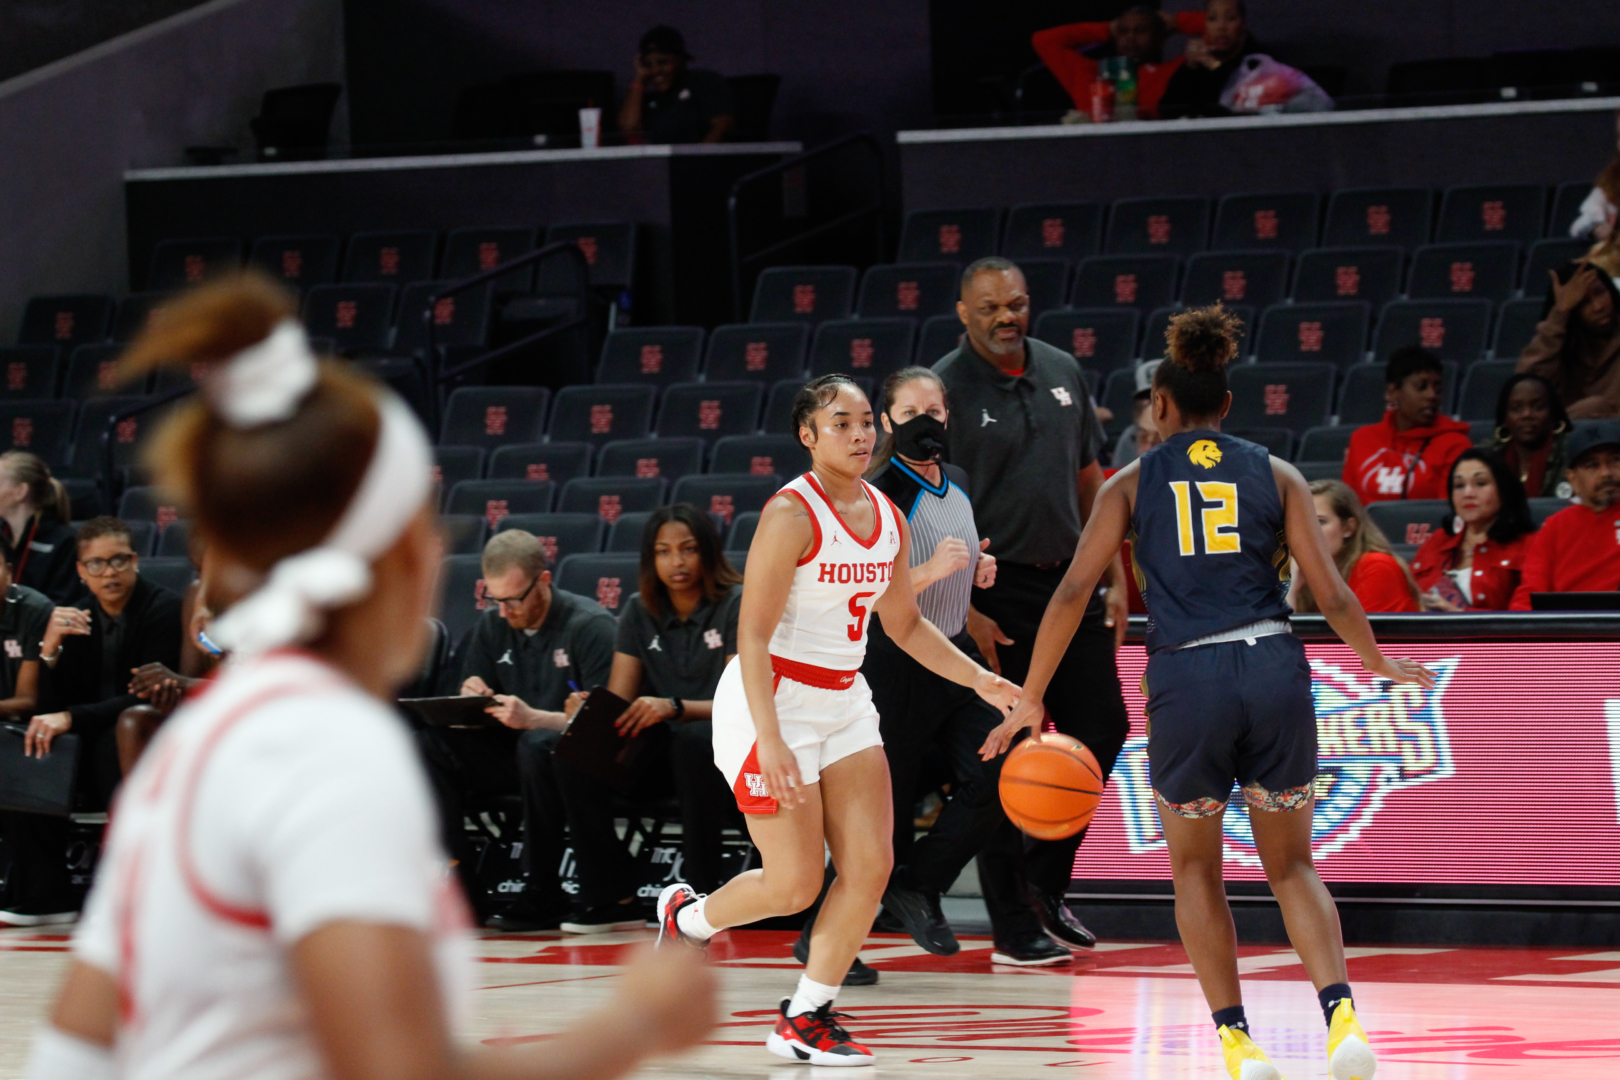 The UH women's basketball team suffered its third loss of the season on Friday, falling to Fordham in Cancun. | Esther Umoh/The Cougar